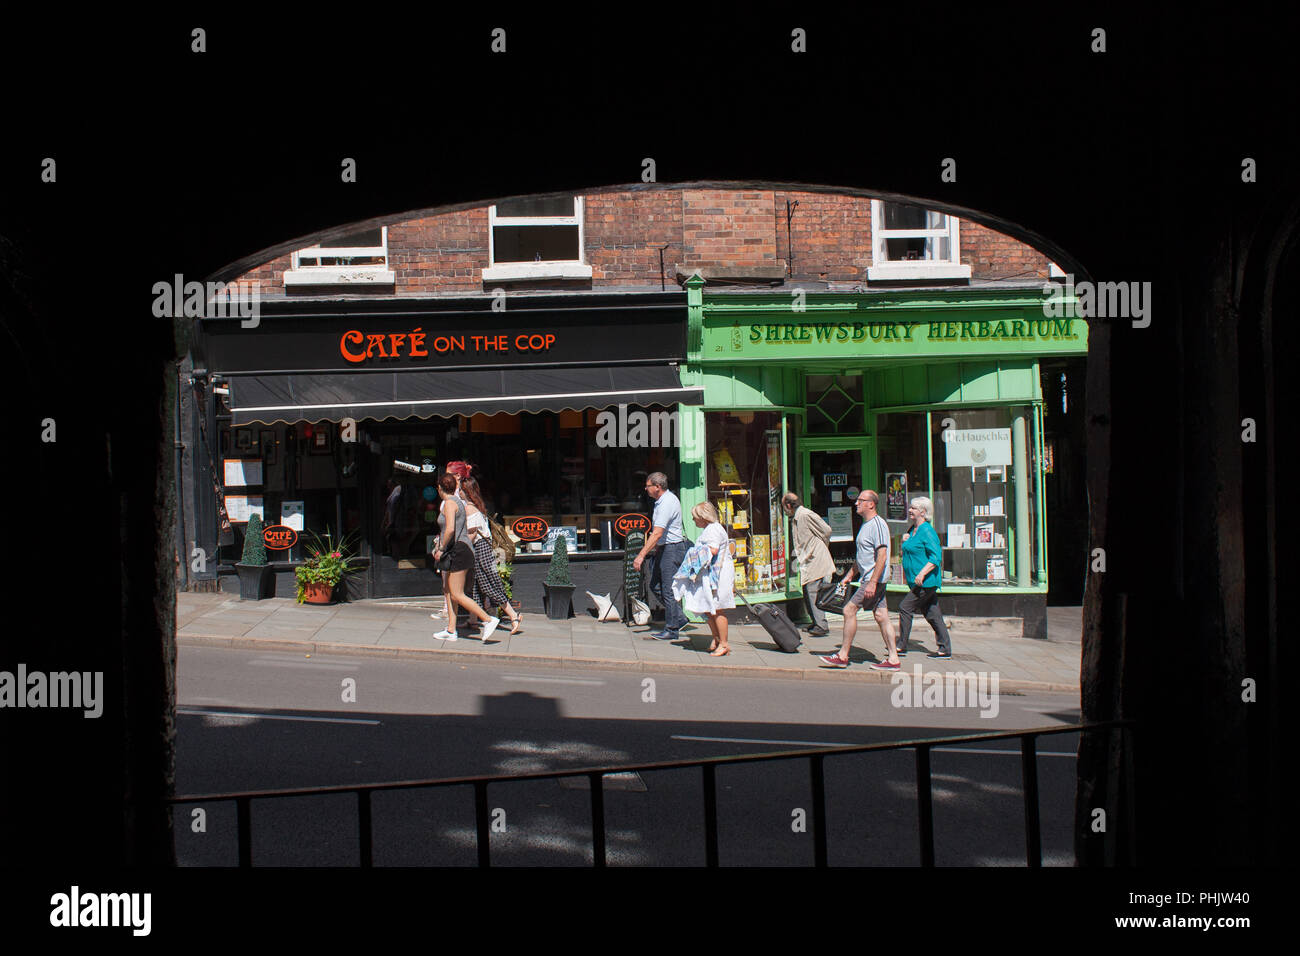 View showing two independent shops on Wyle Cop in the centre of Shrewsbury, Shropshire, 2016. Some people are walking past the shops. Stock Photo